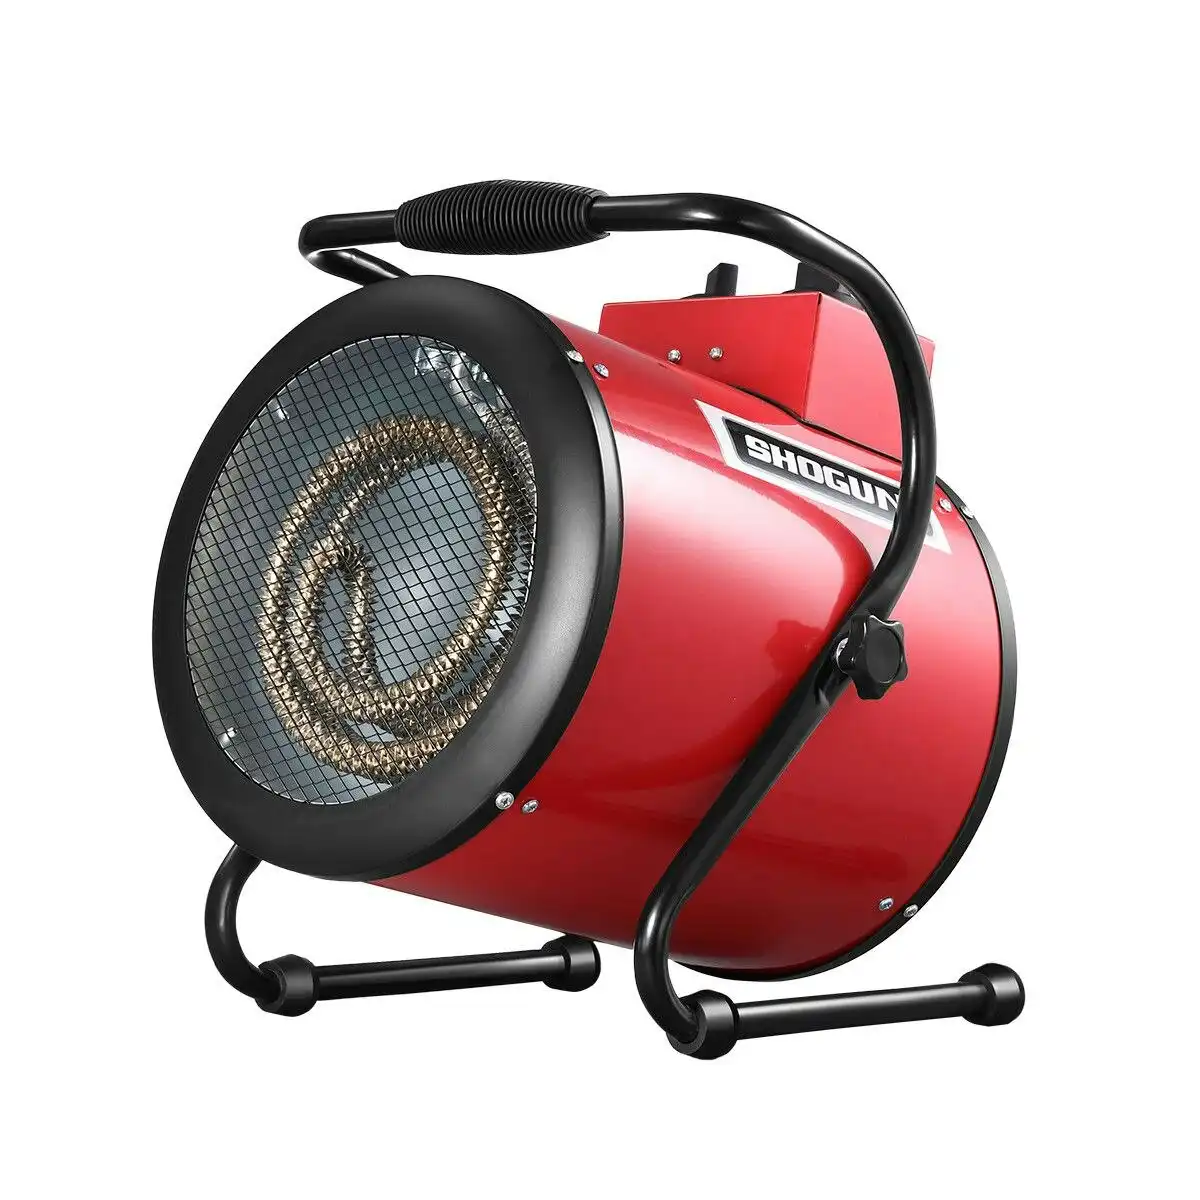 Ausway Industrial Fan Heater 2 in 1 Portable Electric Hot Air Blower Carpet Dryer for Shed Warehouse Workshop SAA 3000W